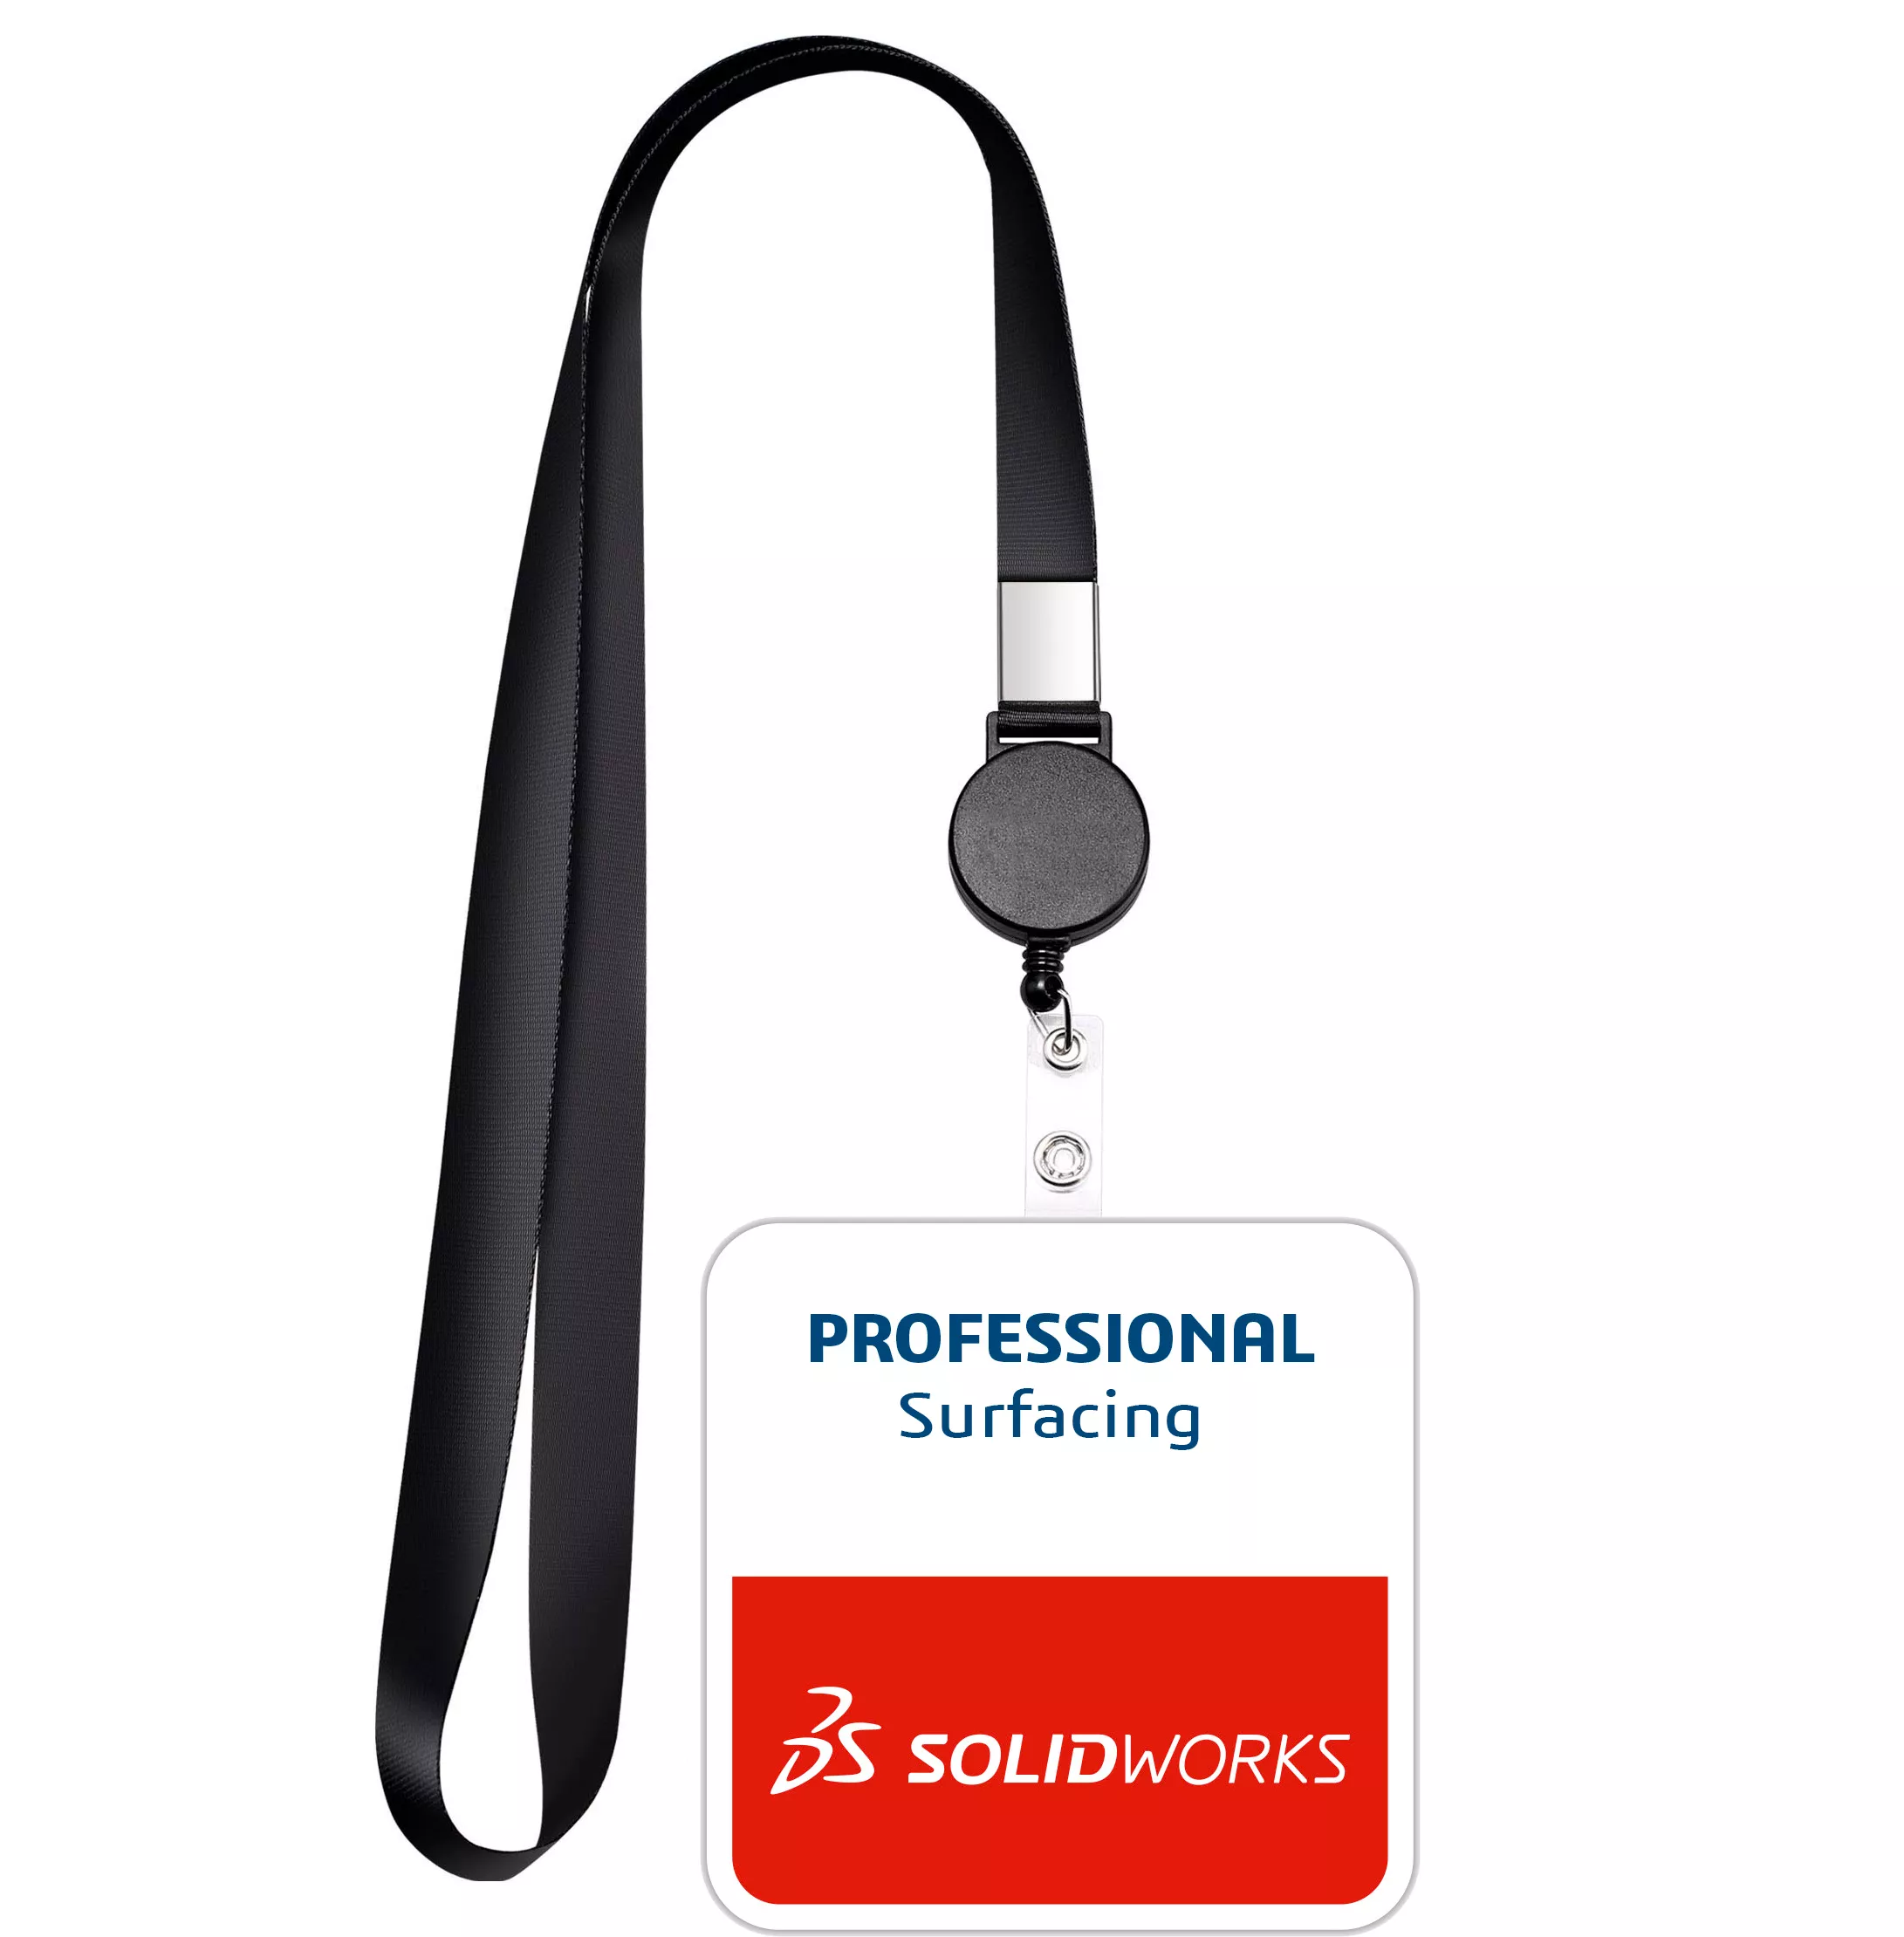 What skills may be required to pass the SOLIDWORKS CSWPA-Surfacing exam?